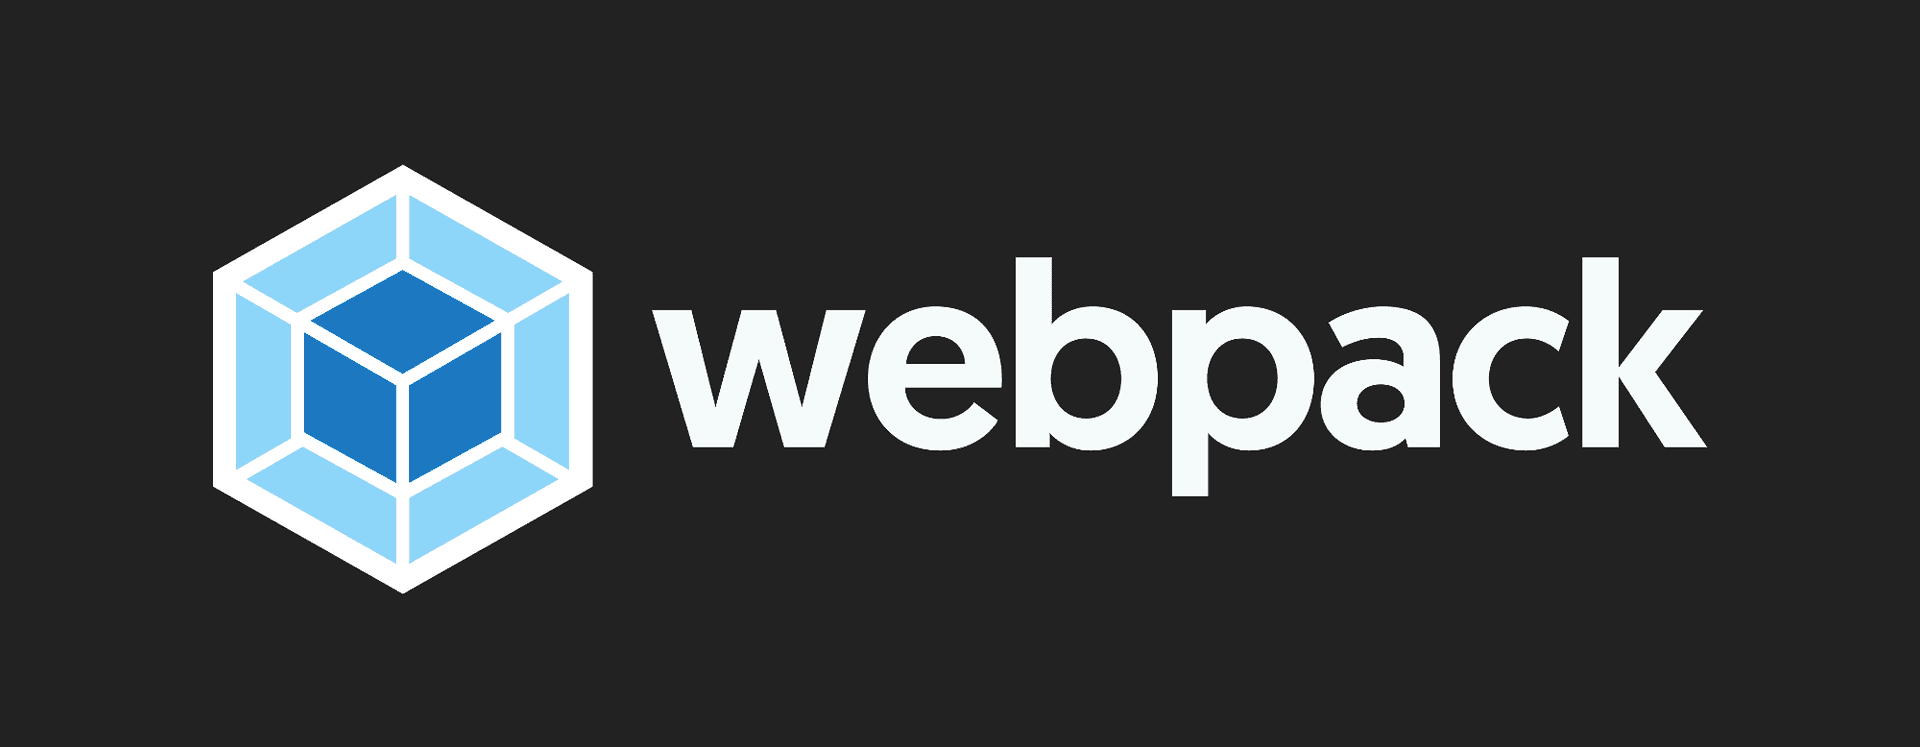 Using webpack to build a javascript library